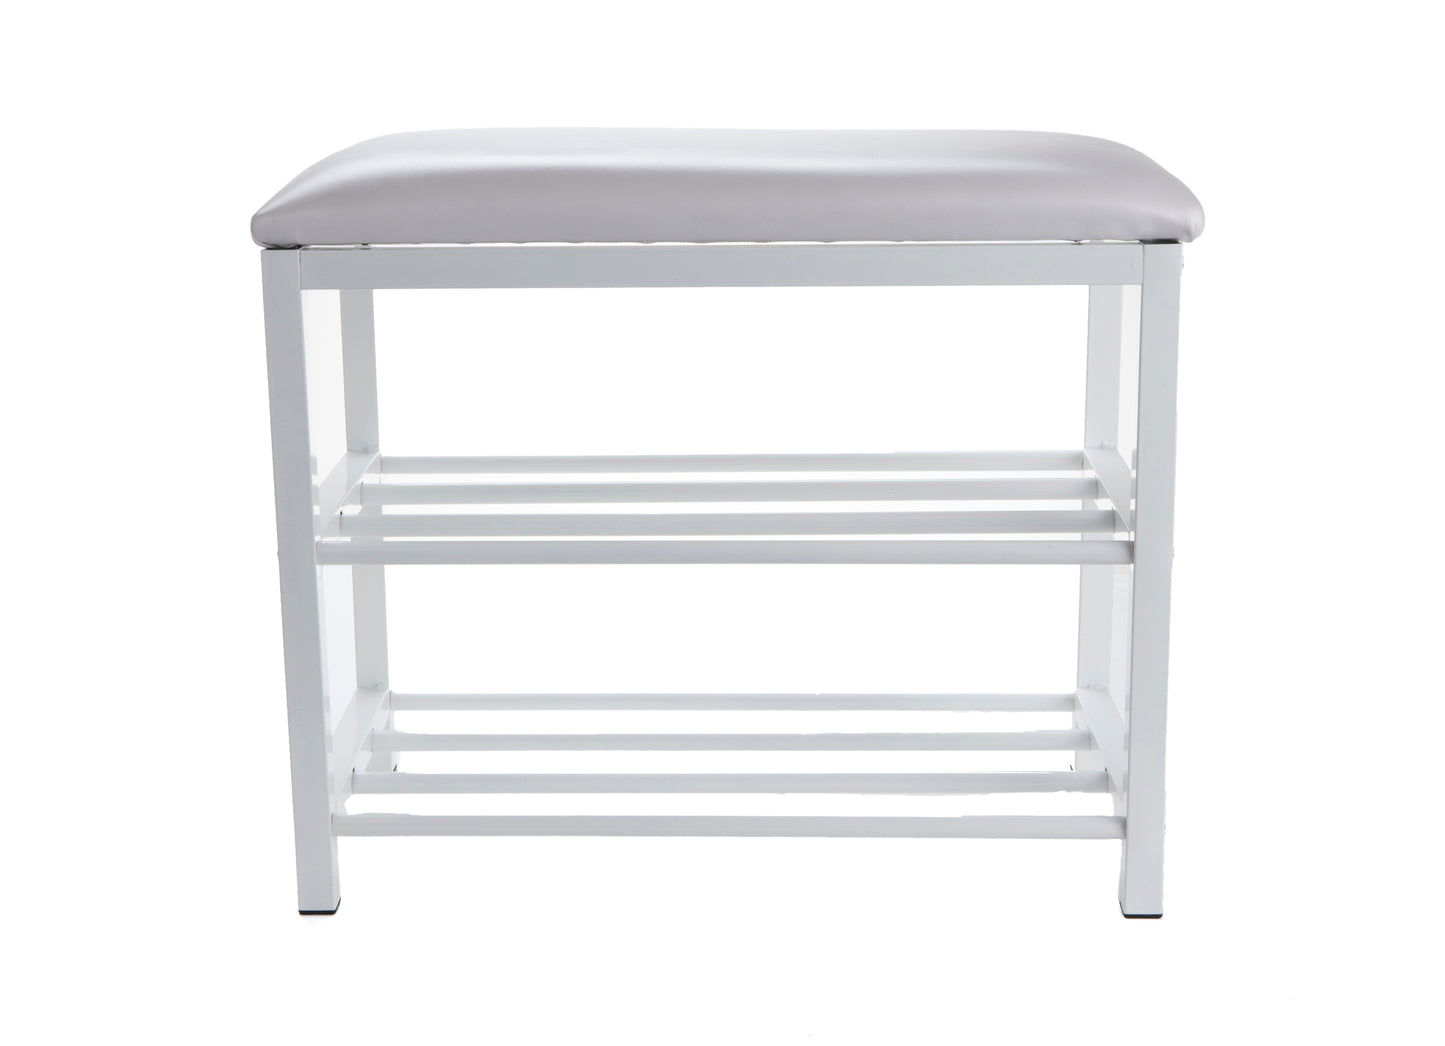 Mind Reader Woodland Collection, 3-Tier Bench, 2 Shoe and Accessory Shelves, Padded Top, Mudroom, Entryway, Bedroom, Metal, White